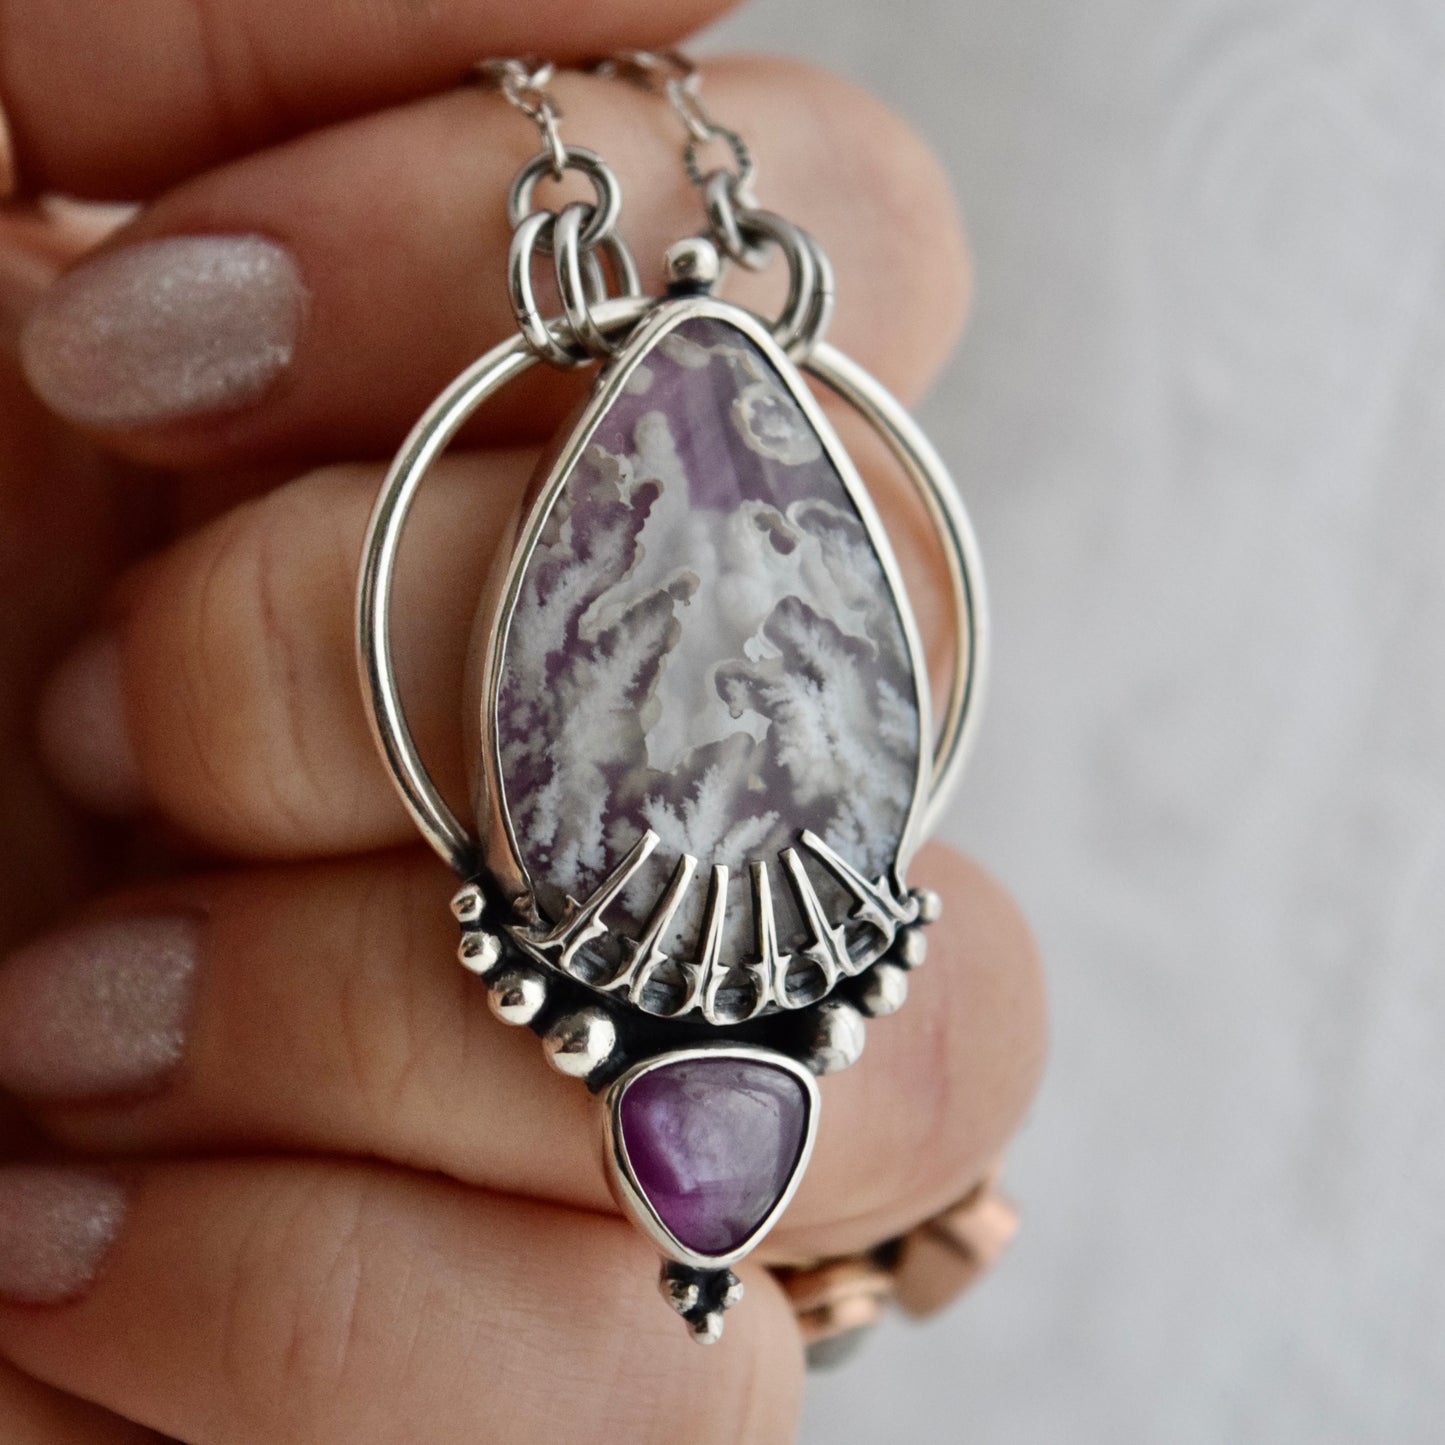 Pendulum Pendant with Composite Backed Plume Agate and Pink Sapphire